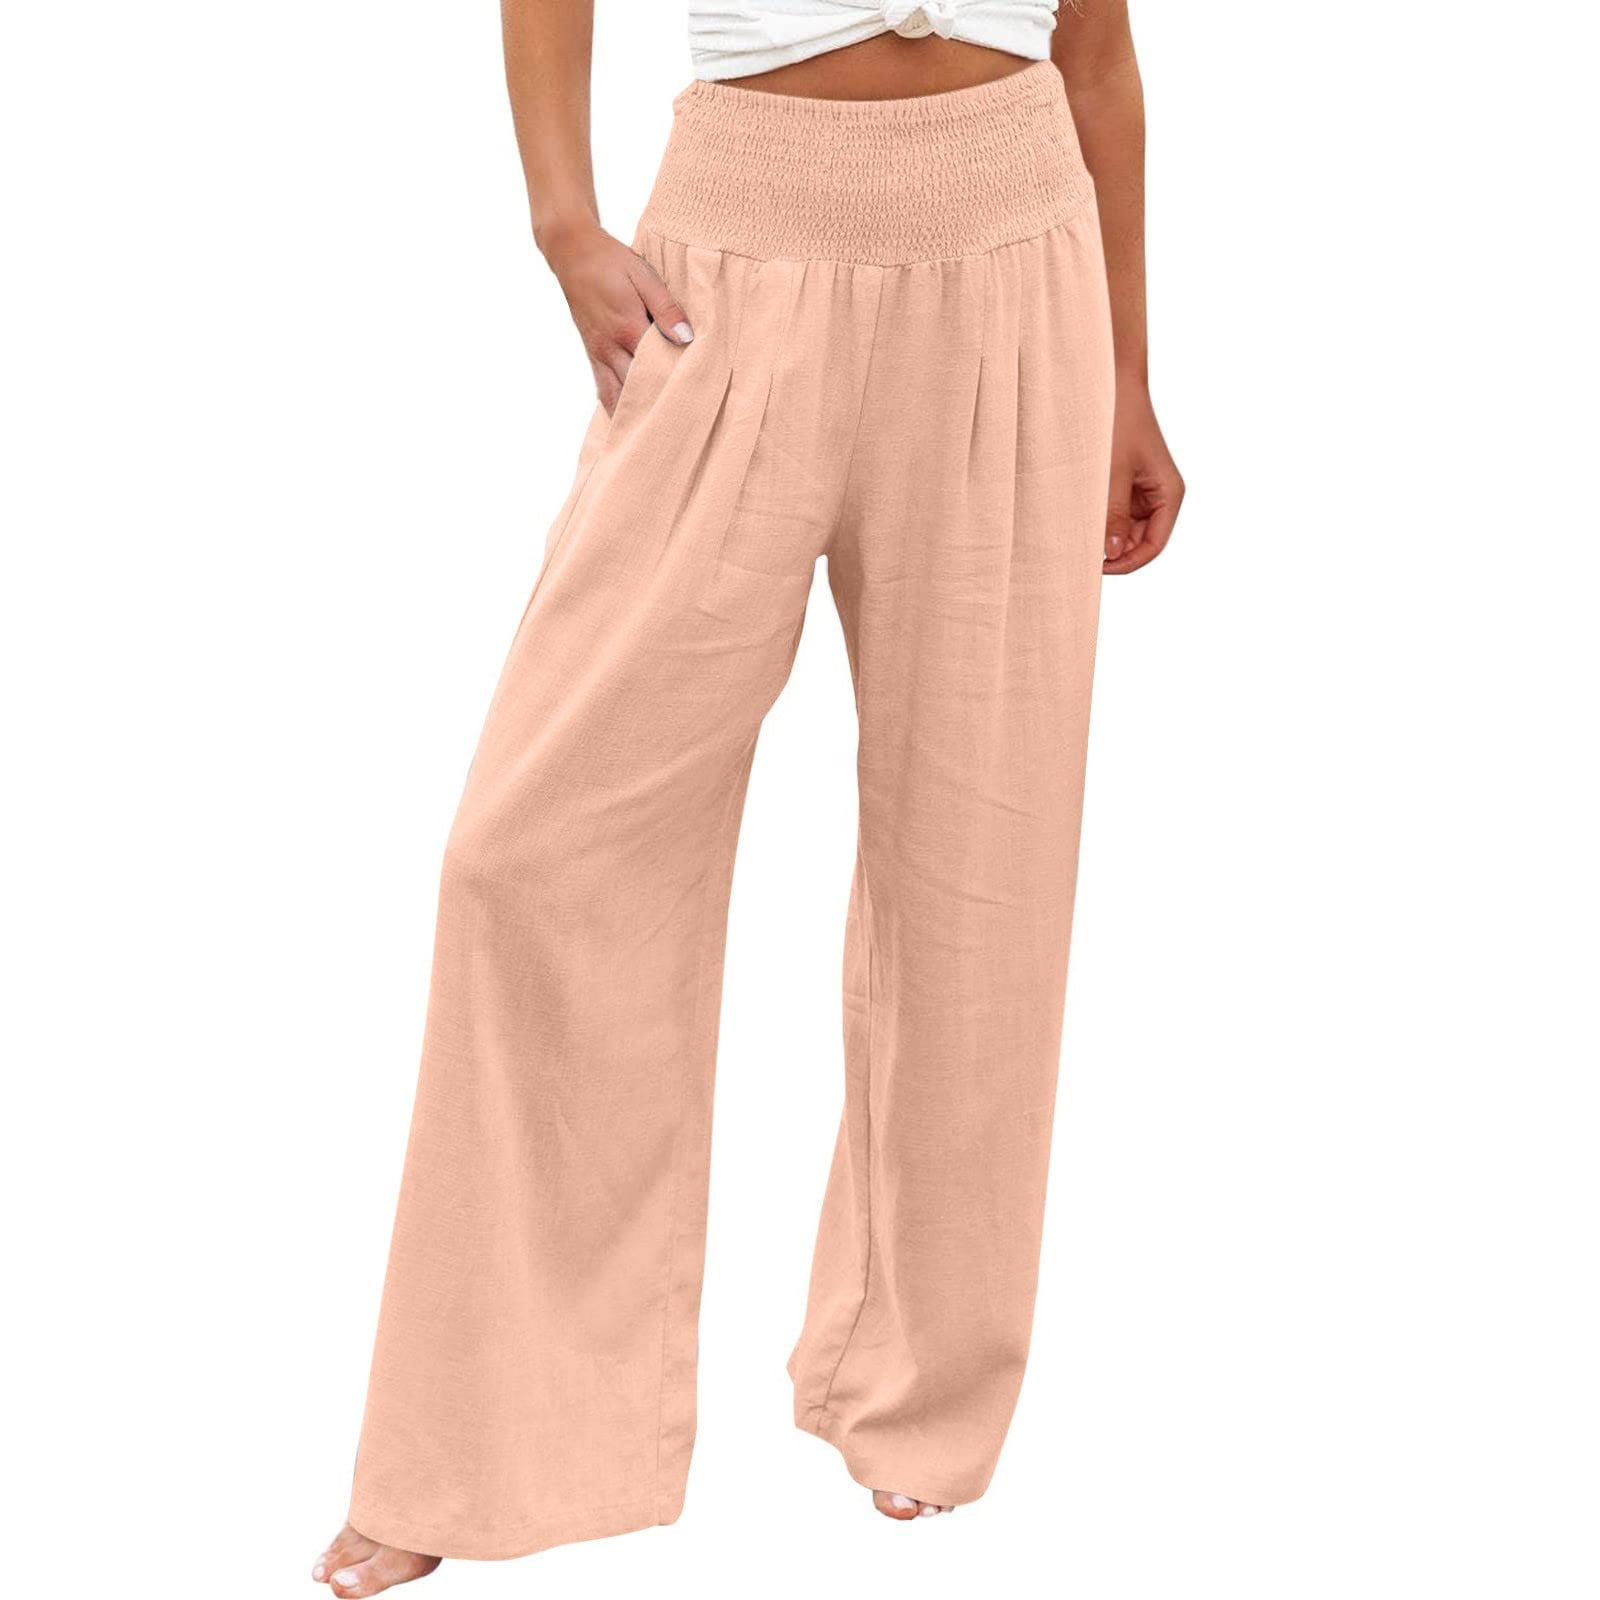 Pejock Women's Stretchy Wide Leg Pants Summer High Waisted Cotton Linen  Palazzo Pants Wide Leg Long Lounge Pant Trousers with Pocket Bronze M (US